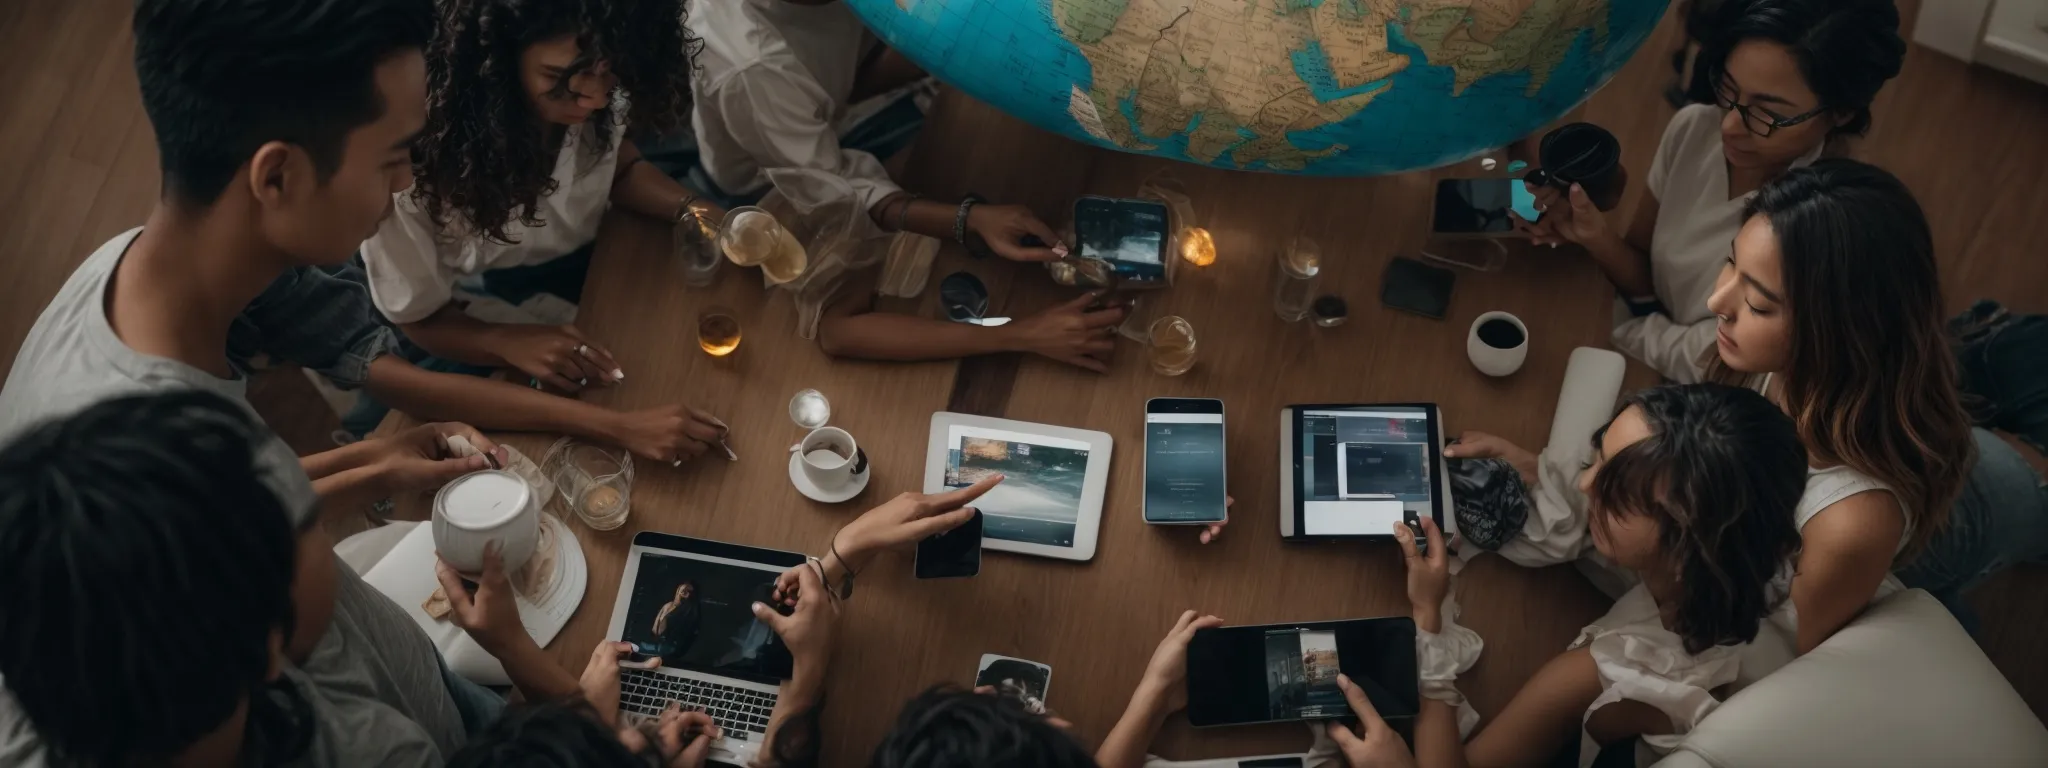 a globe surrounded by diverse people using various digital devices, symbolizing global connectivity through technology.